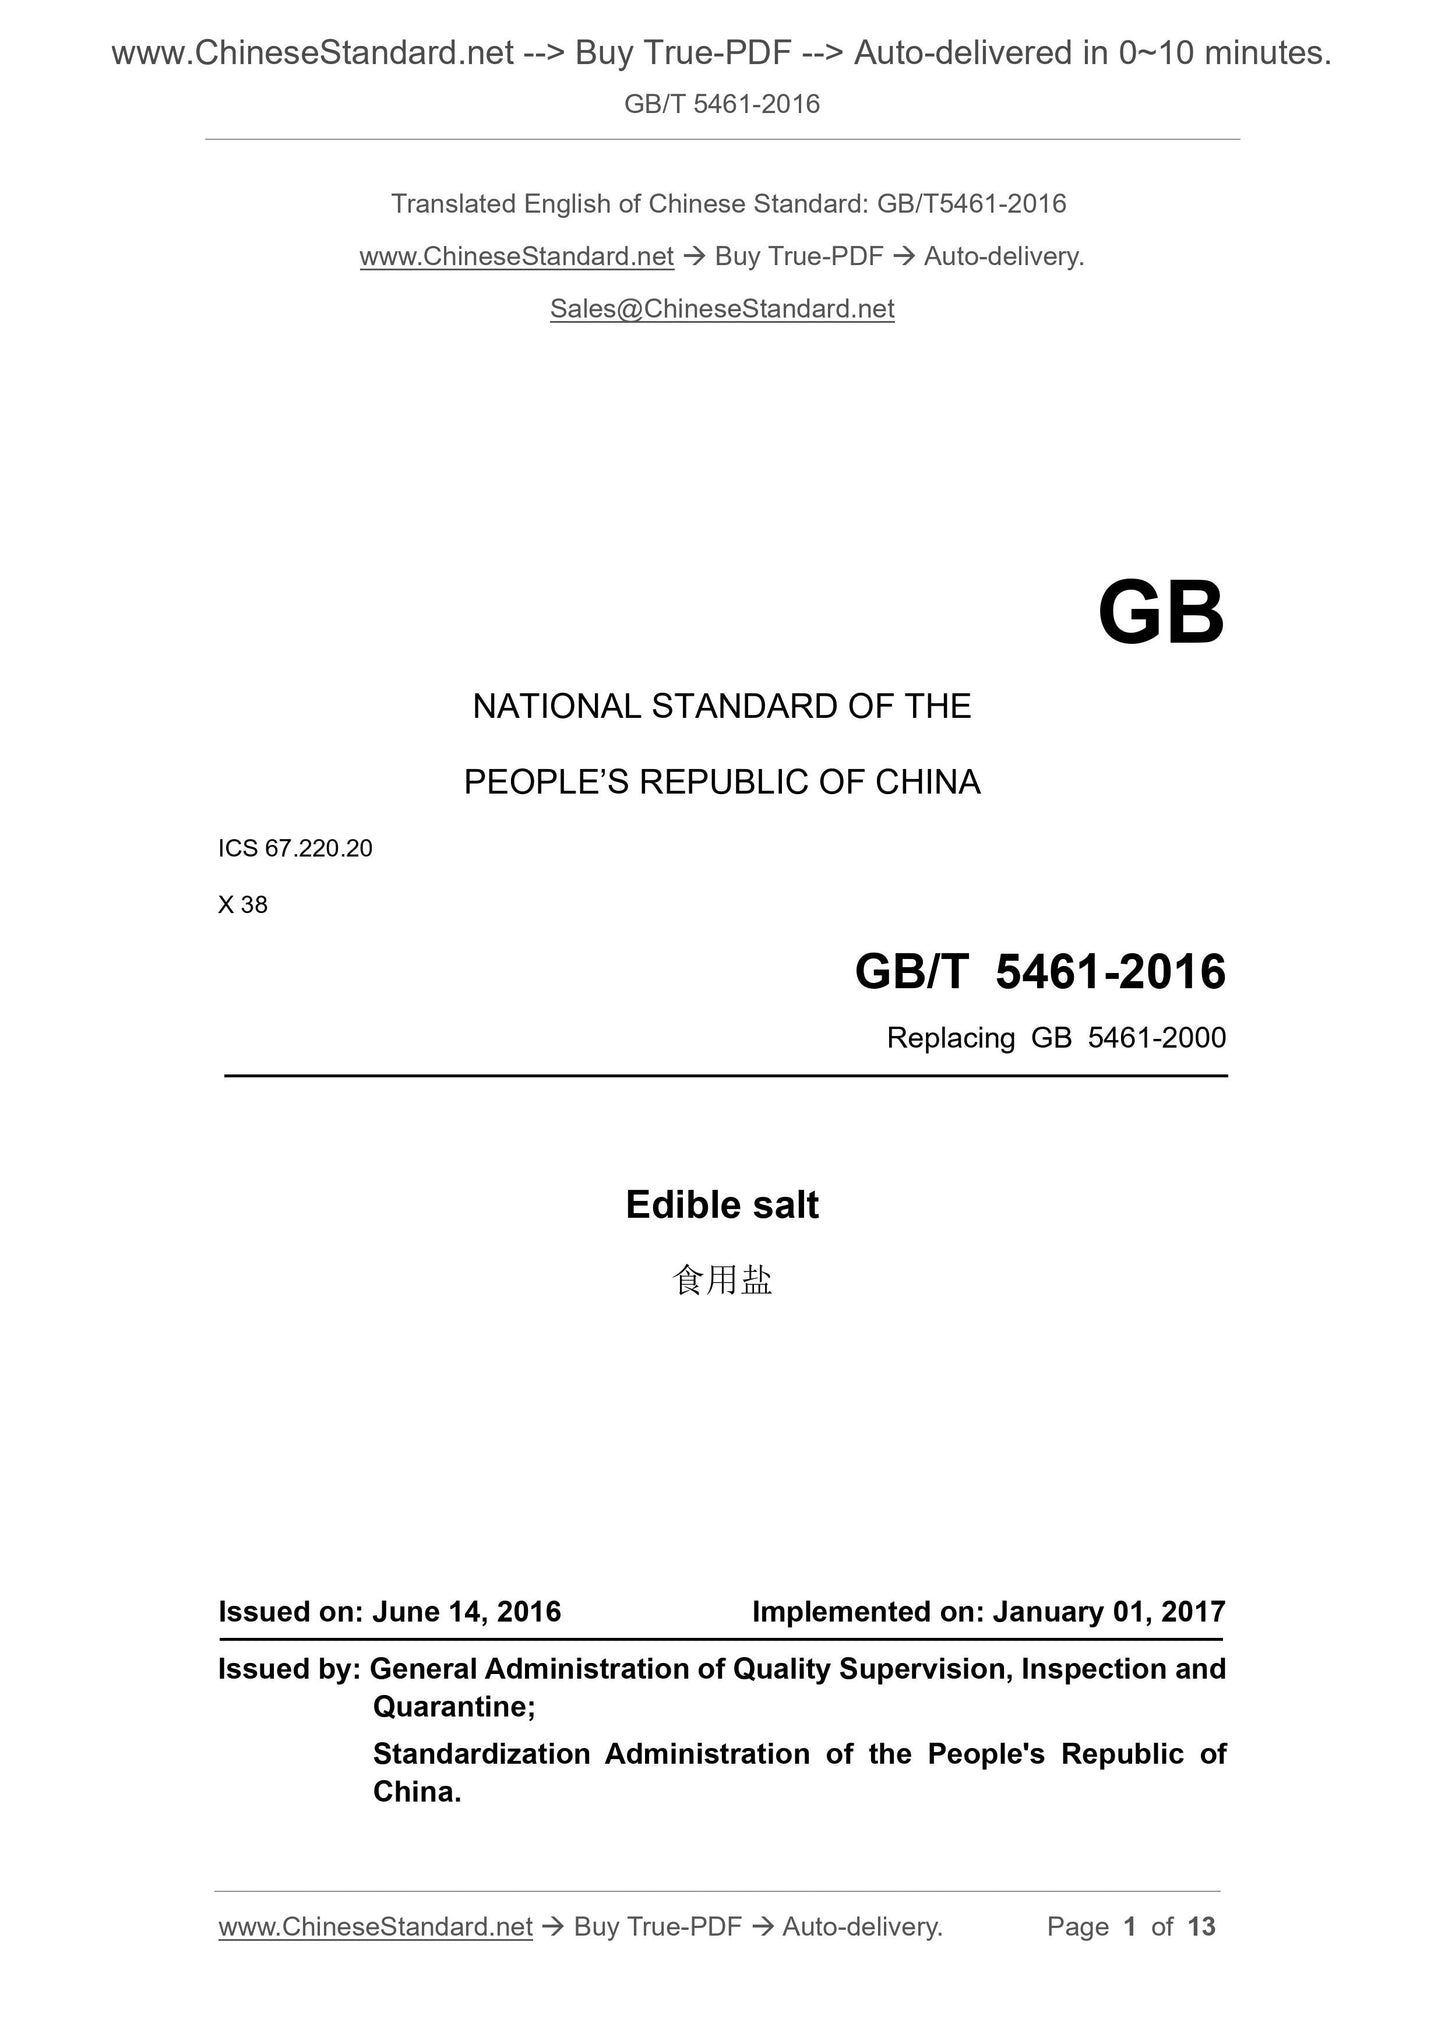 GB/T 5461-2016 Page 1